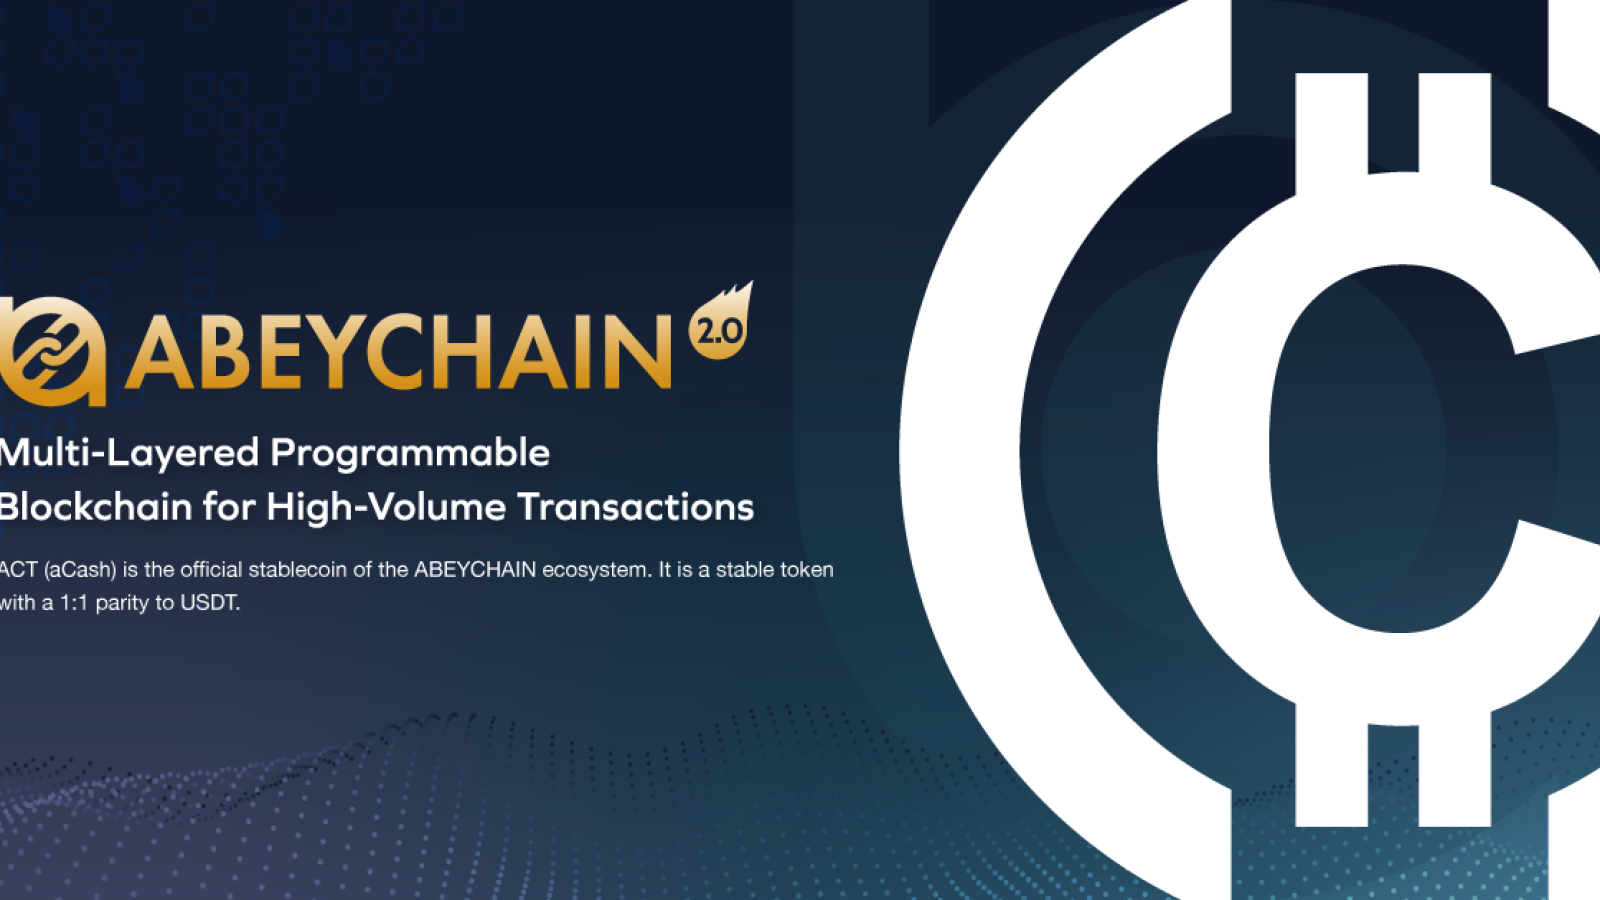 ABEYCHAIN 2.0 Launched to Solve the Biggest Problem in Blockchain